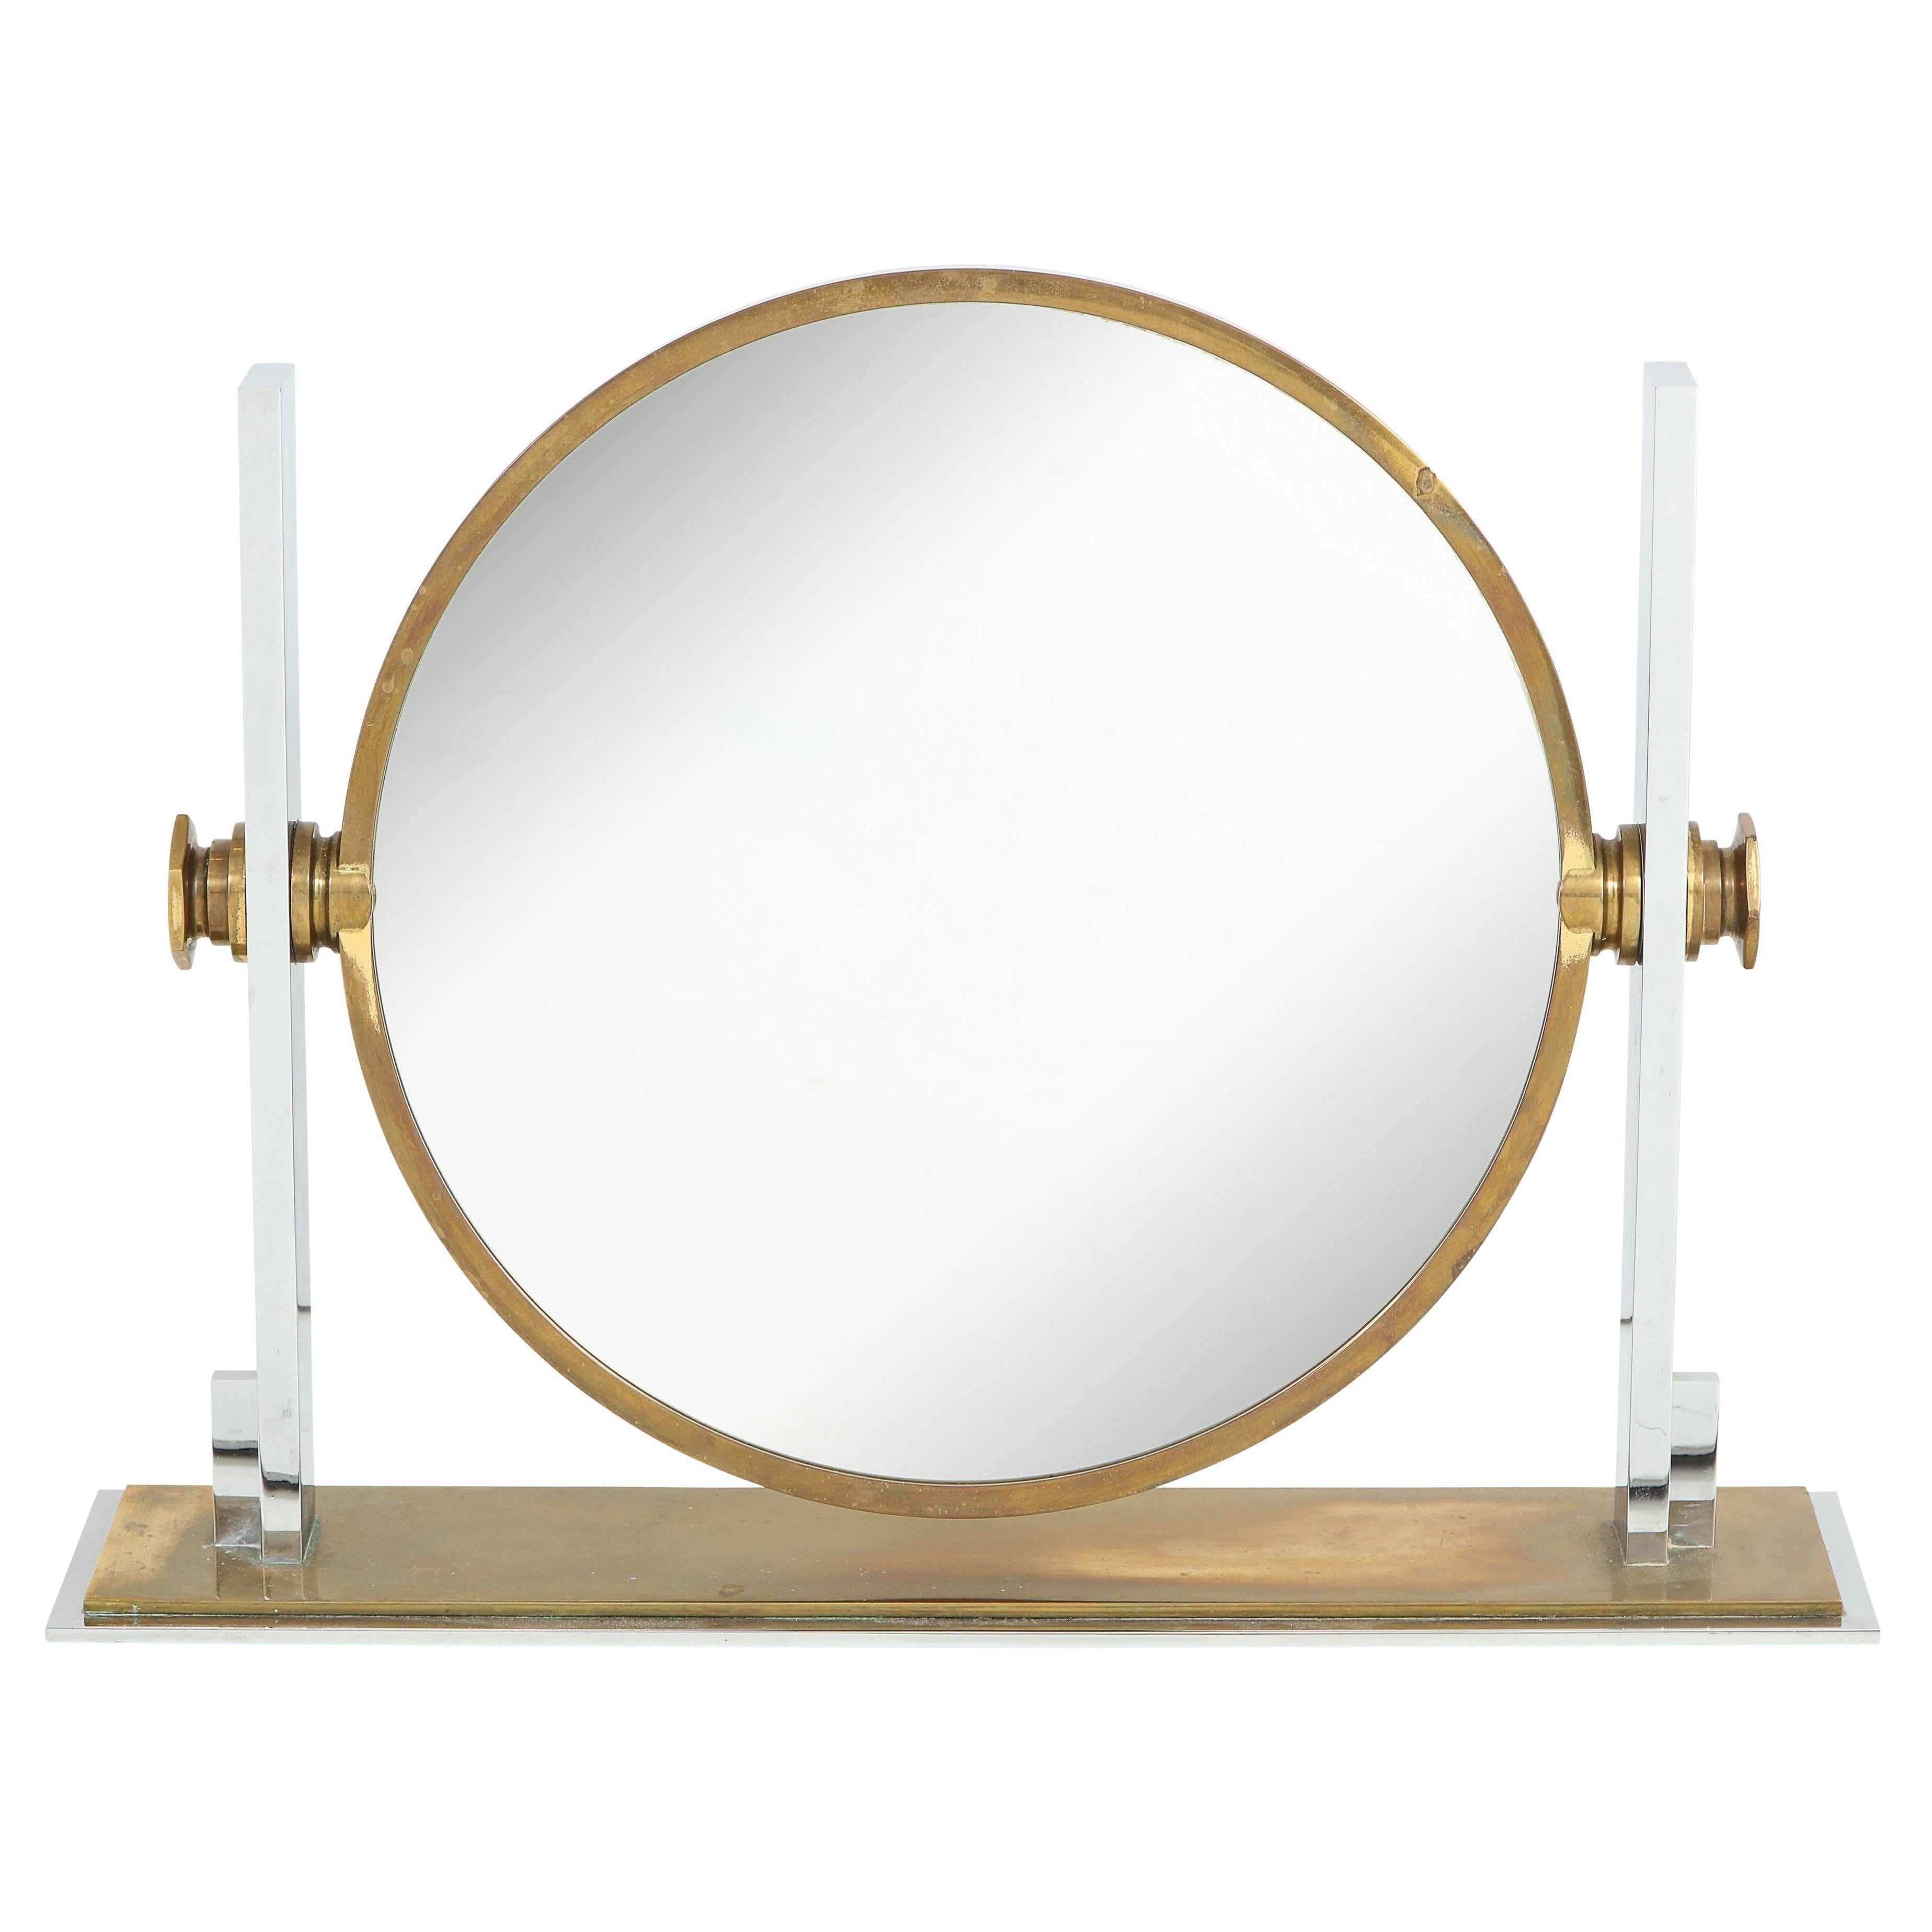 Karl Springer mirror, brass chromed steel, convex. Large-scale table top or vanity mirror in original condition with natural aged patina to the brass. The revolving mirror is adjustable and flips from a flat side to a convex side for a magnified